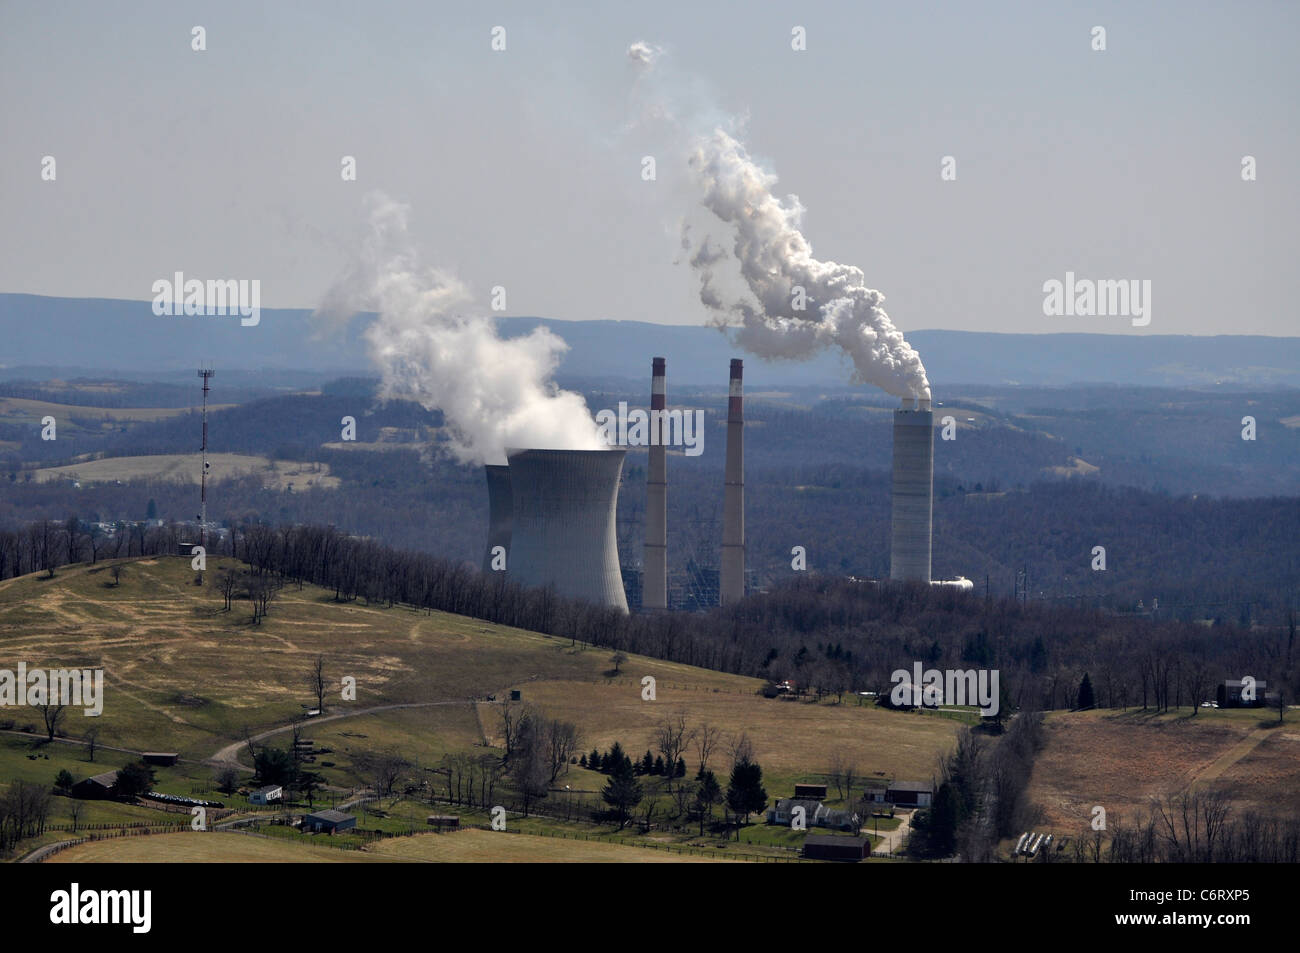 Electric power plant from an ariel view of the smoke stacks and cooling towers Stock Photo